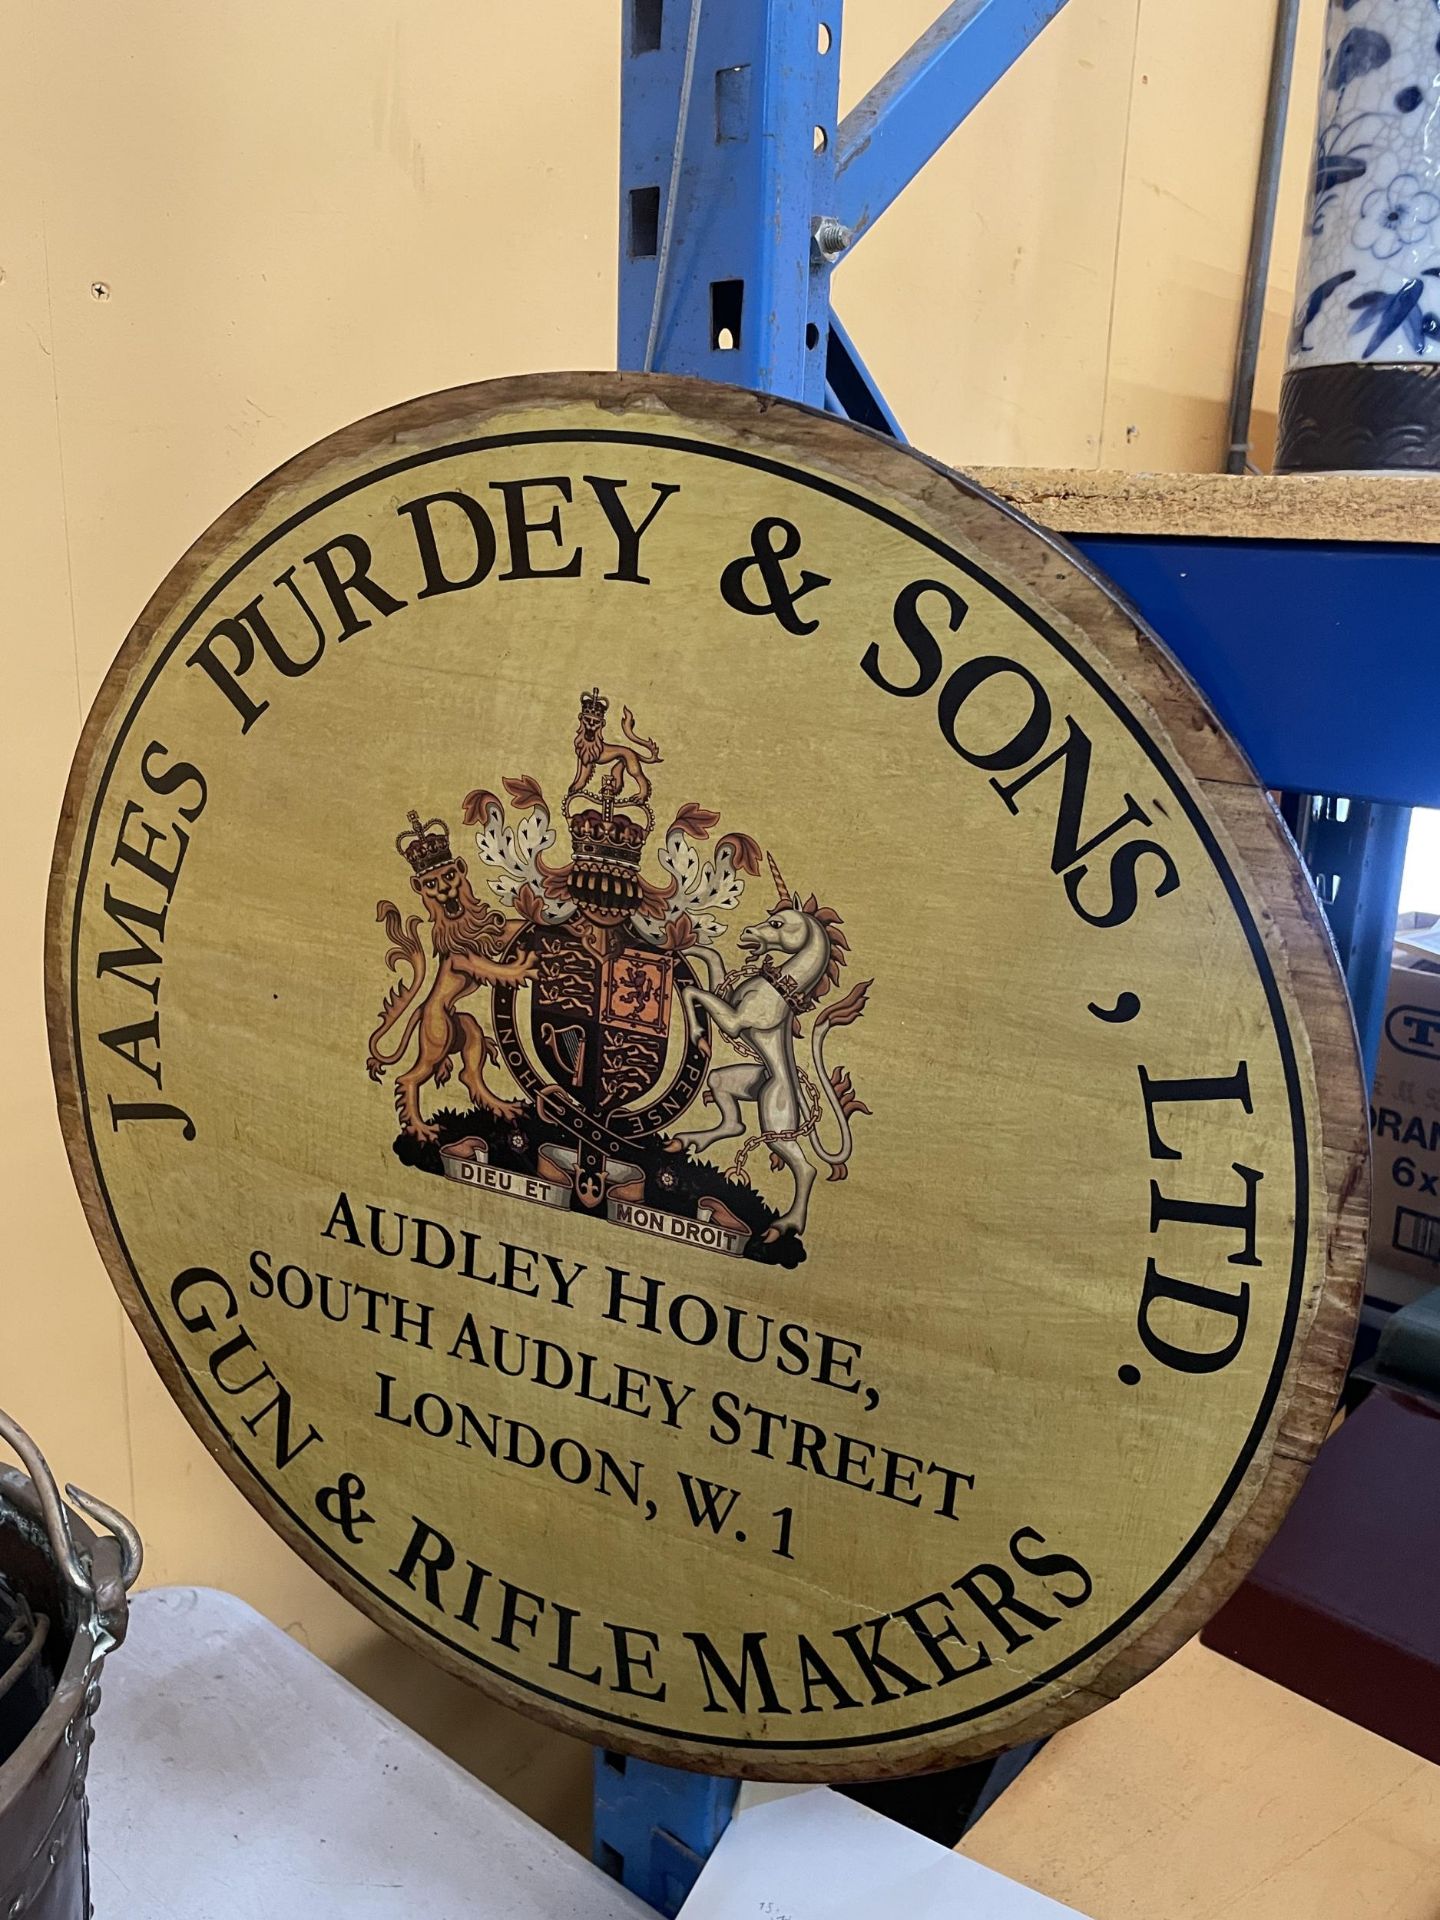 A LARGE CIRCULAR WOODEN JAMES PURDEY & SONS GUN AND RIFLE MAKERS SIGN